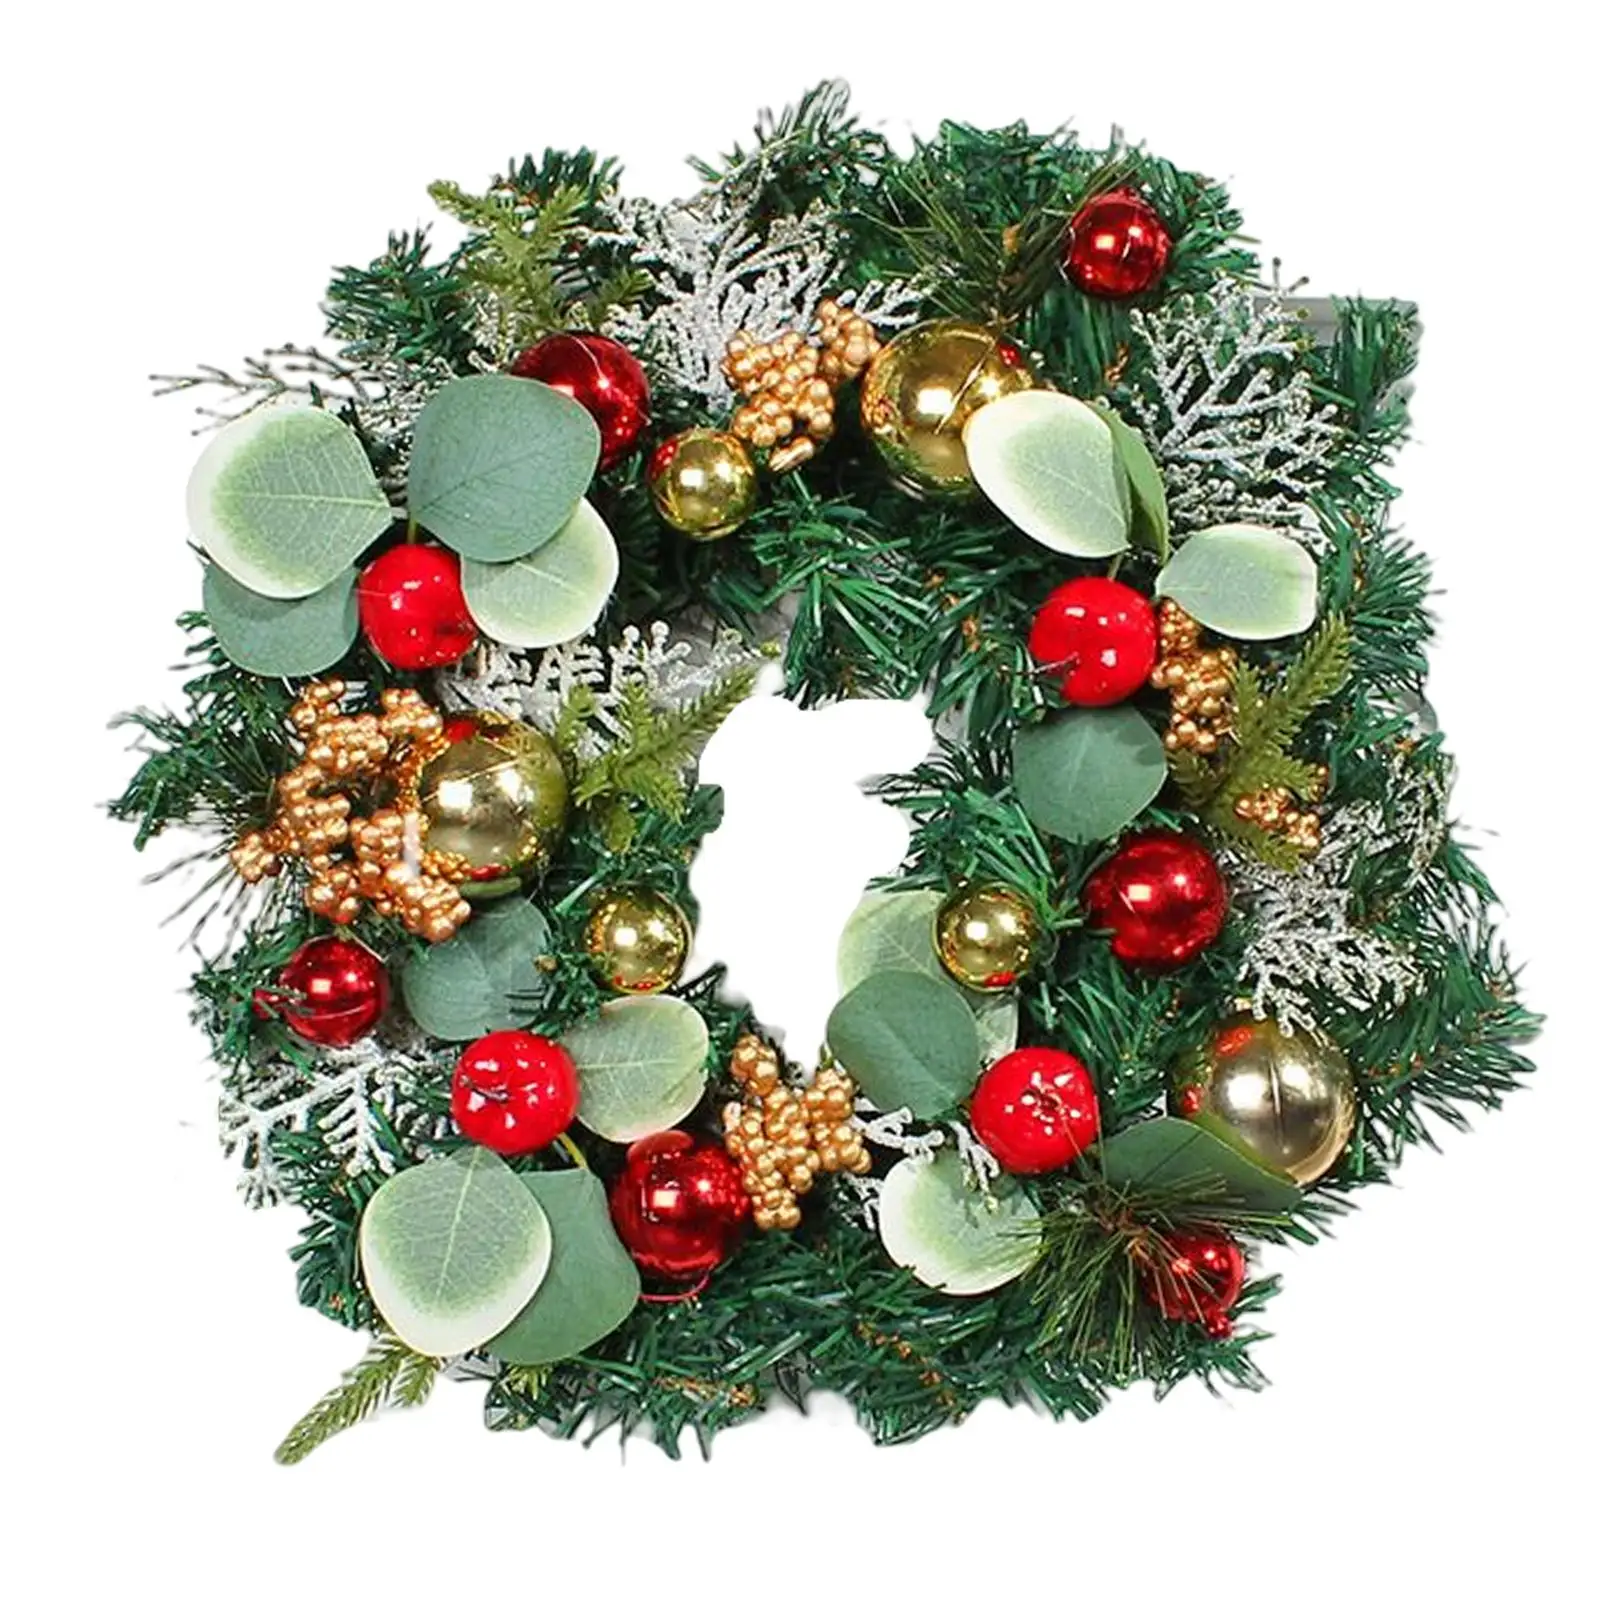 Christmas Wreath Garland decor Hanging Winter Wreath Christmas Decoration for Fireplace Outdoor Indoor Celebration Festival